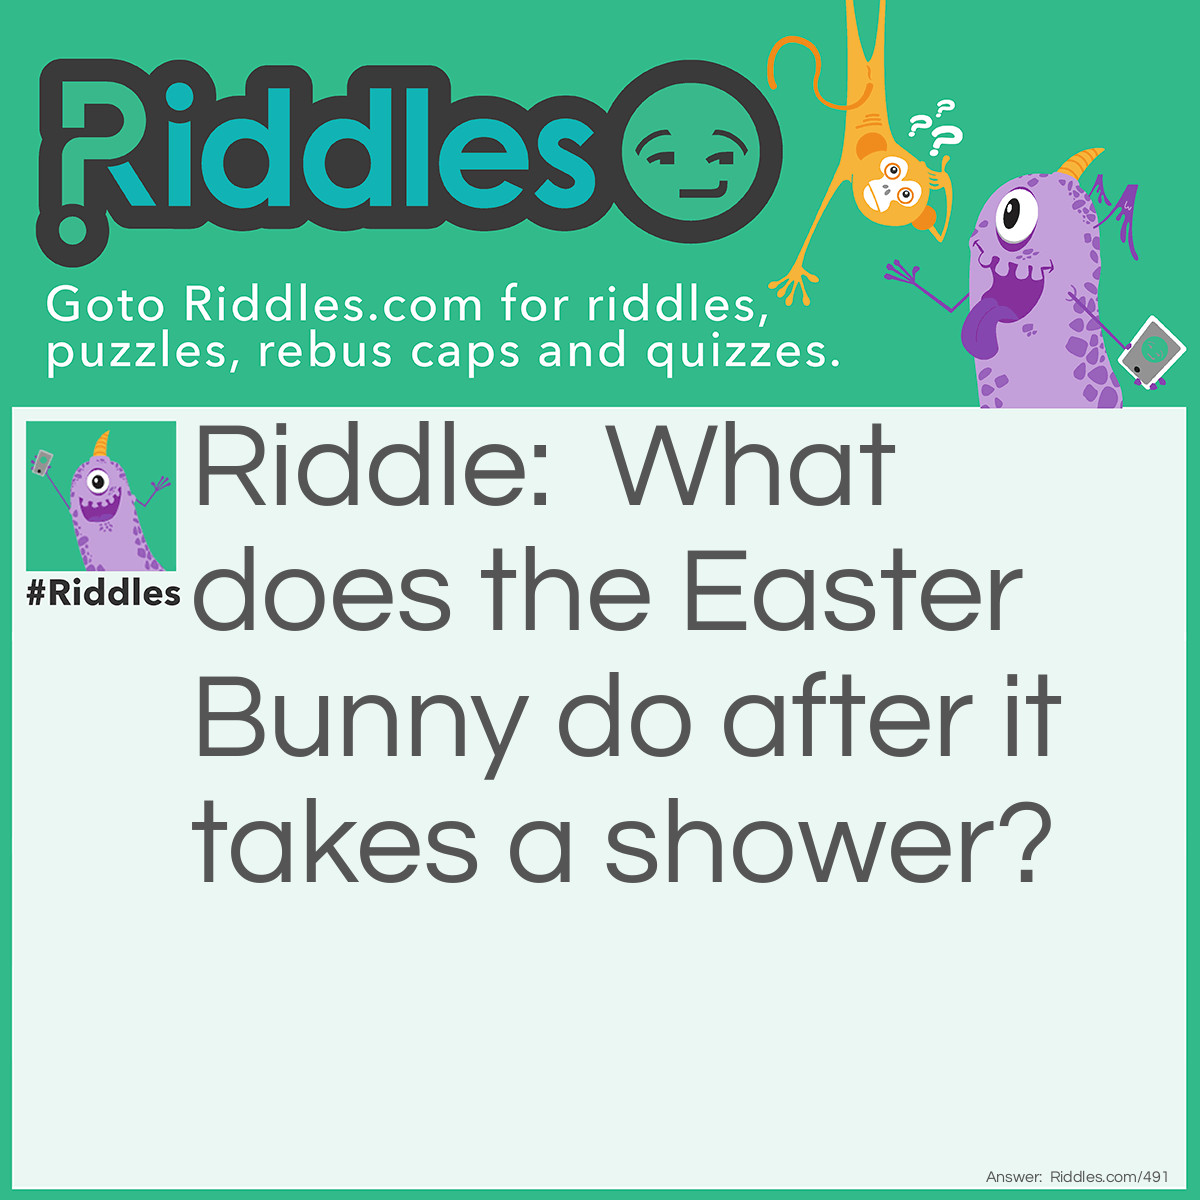 Riddle: What does the <a href="https://www.riddles.com/quiz/easter-riddles">Easter Bunny</a> do after it takes a shower? Answer: He uses a Hare dryer